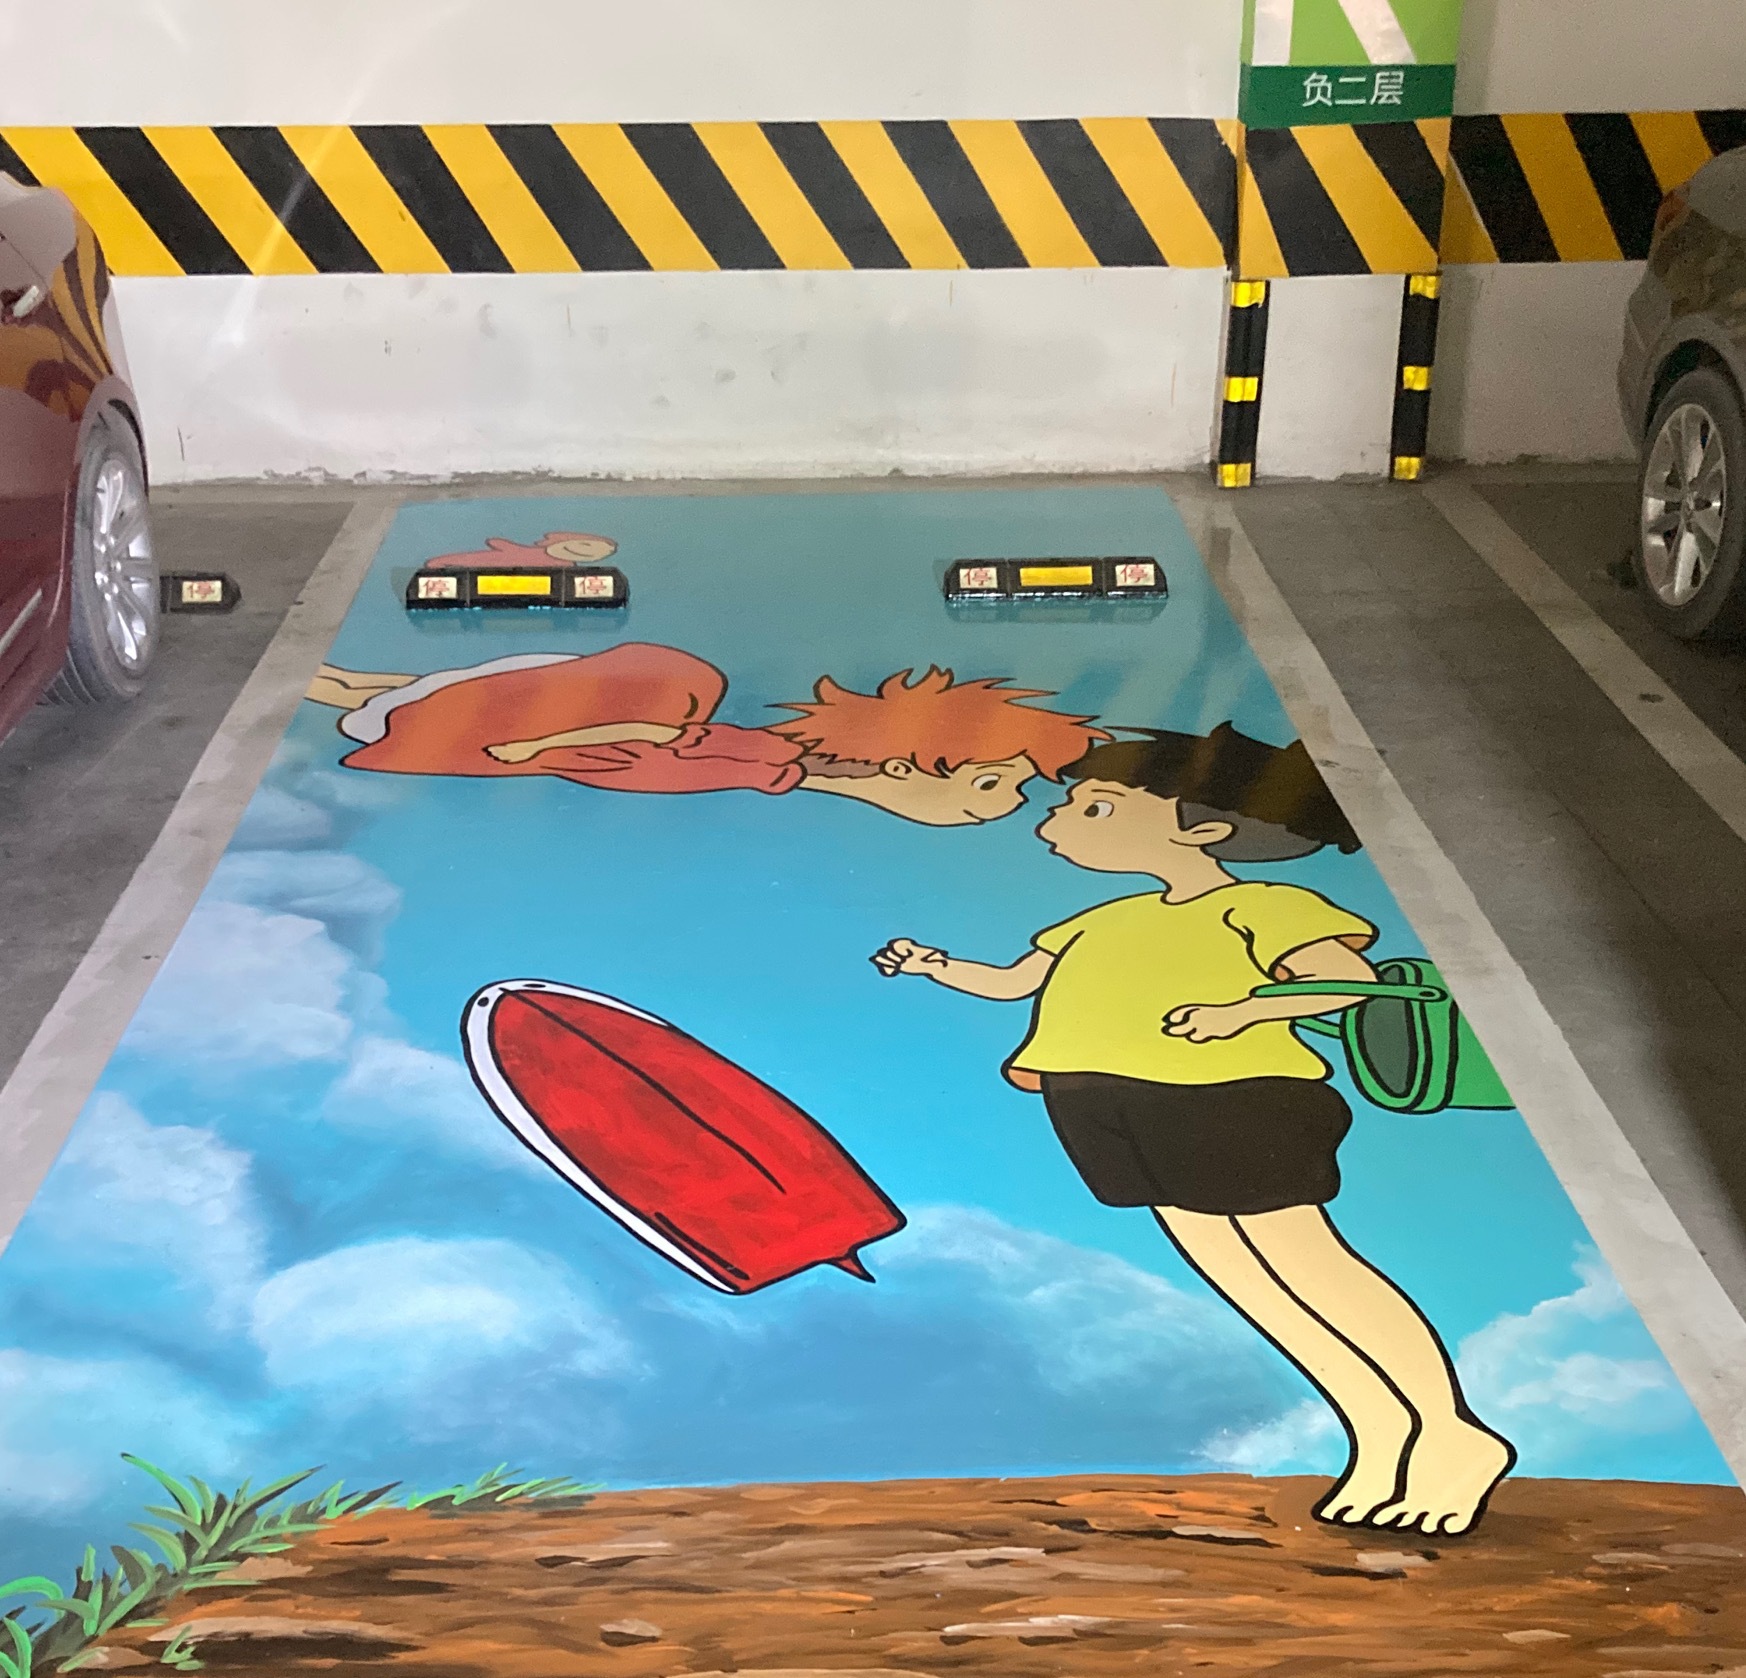 [wear-resisting]Waterborne epoxy resin indoor Garage Dedicated Two-component Finishes Protective lacquer Parking spaces Graffiti